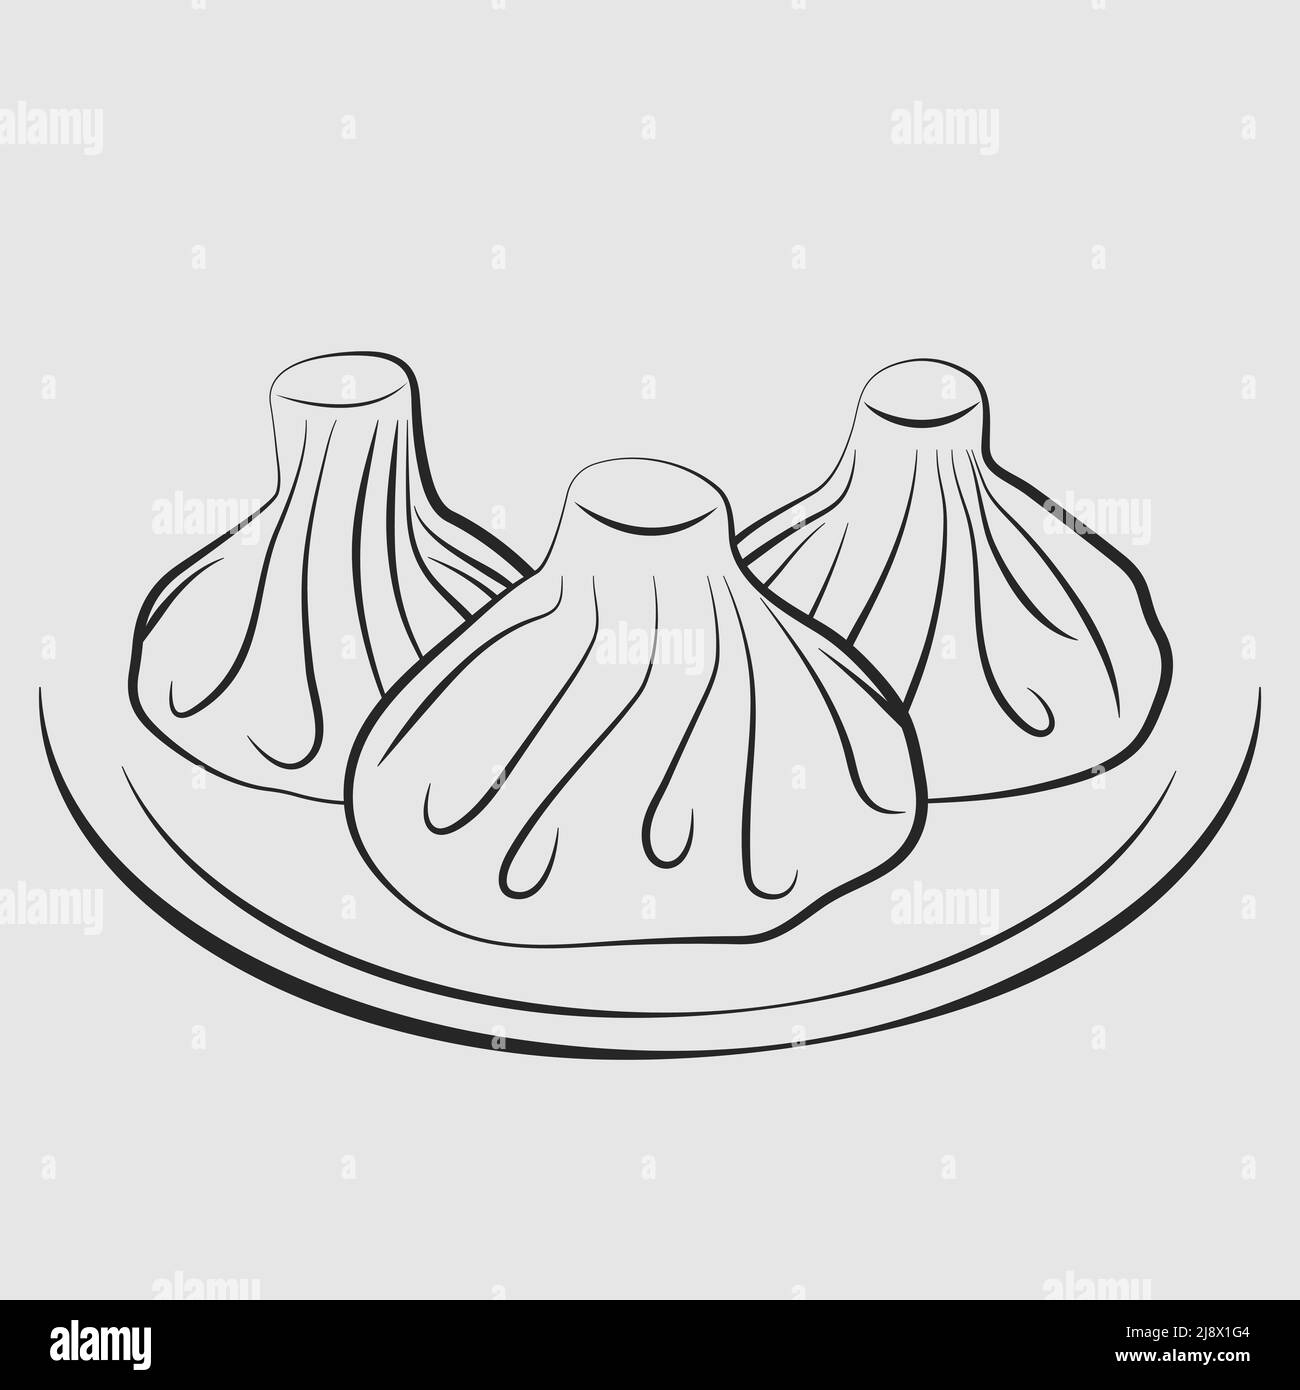 3,179 Round Cake Mold Images, Stock Photos, 3D objects, & Vectors